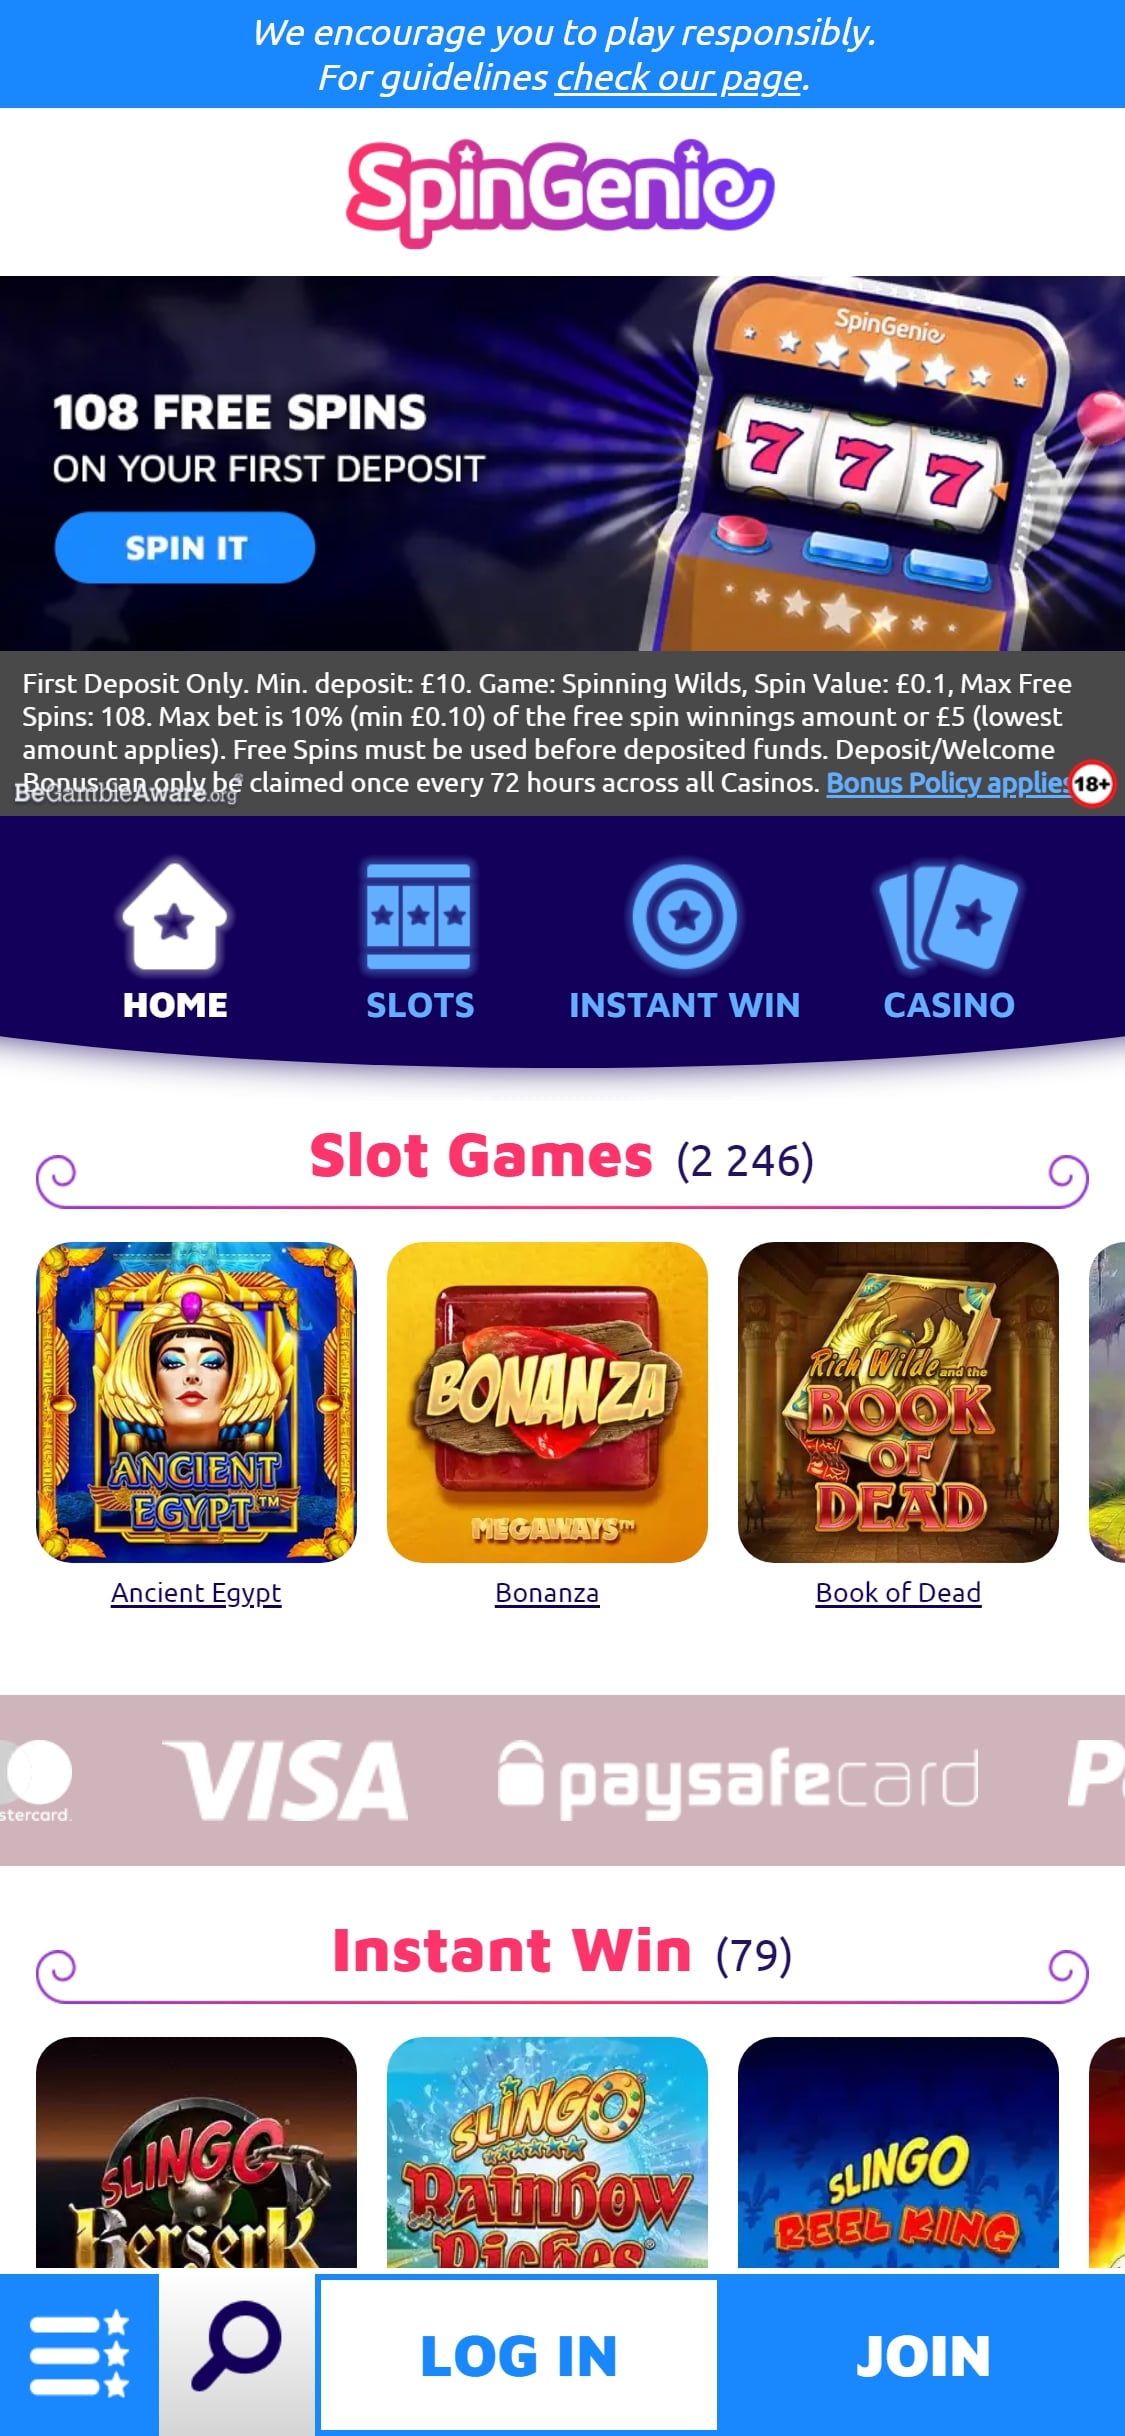 Spin Genie Casino Mobile Review